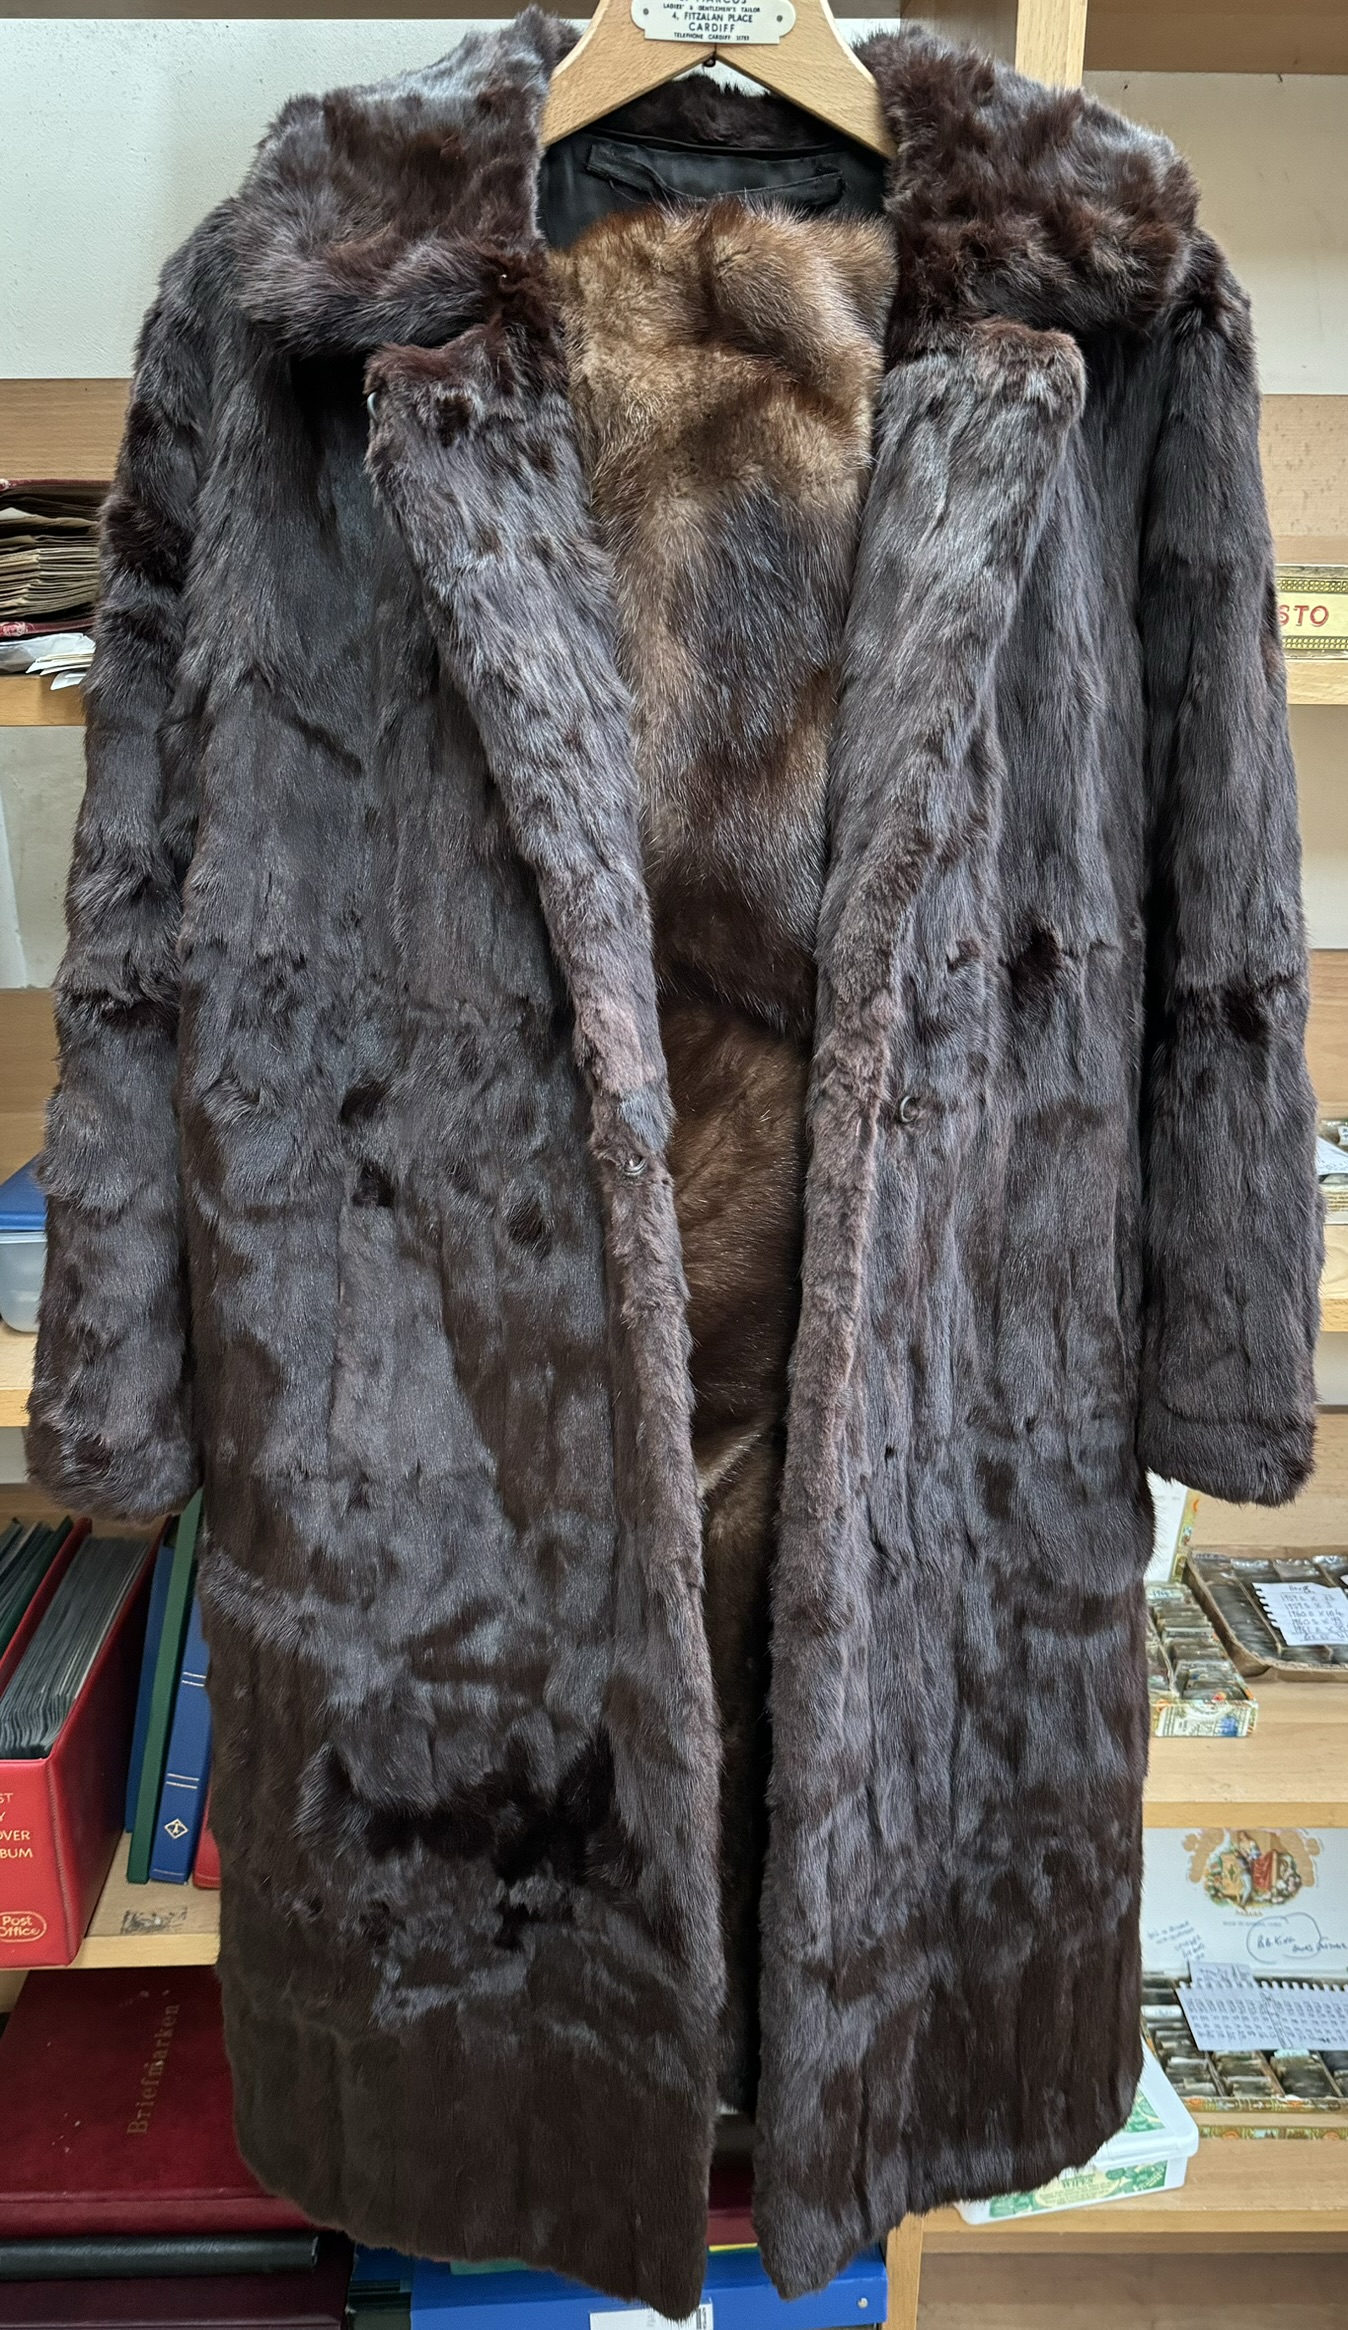 A National Furs three quarter length fur coat together with a fur stole